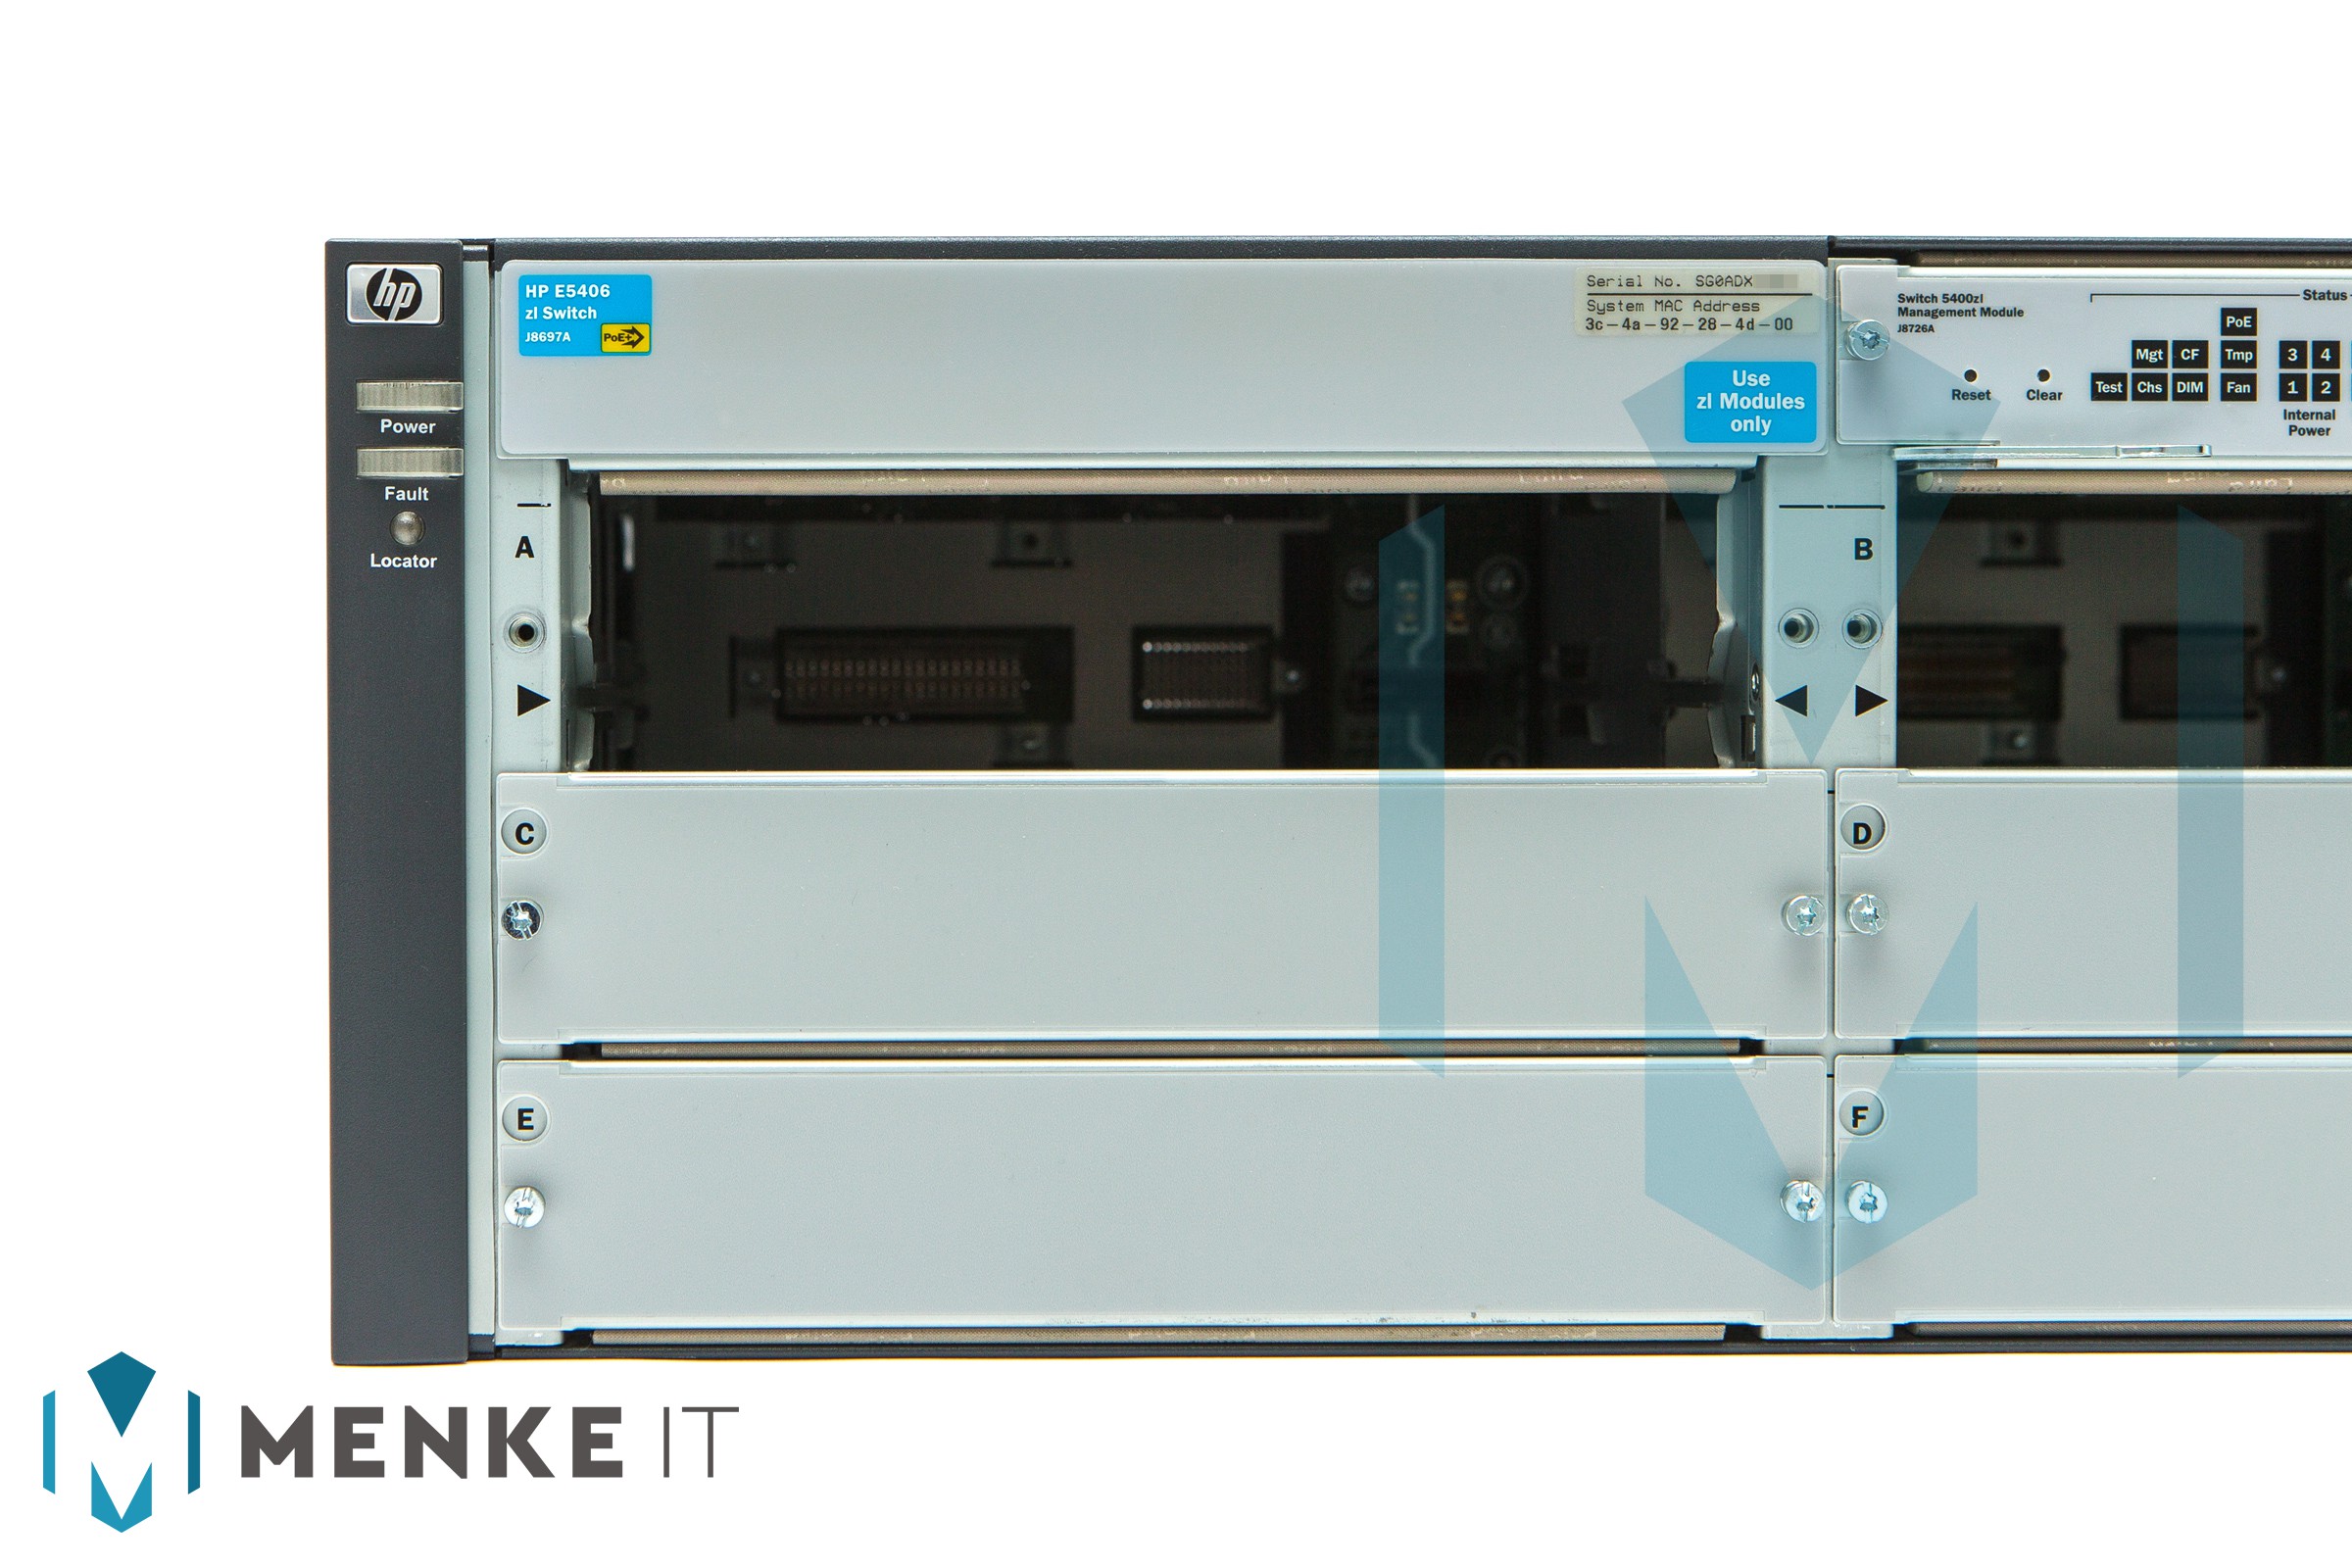 HP Switch Chassis 5406zl v2 J9642A